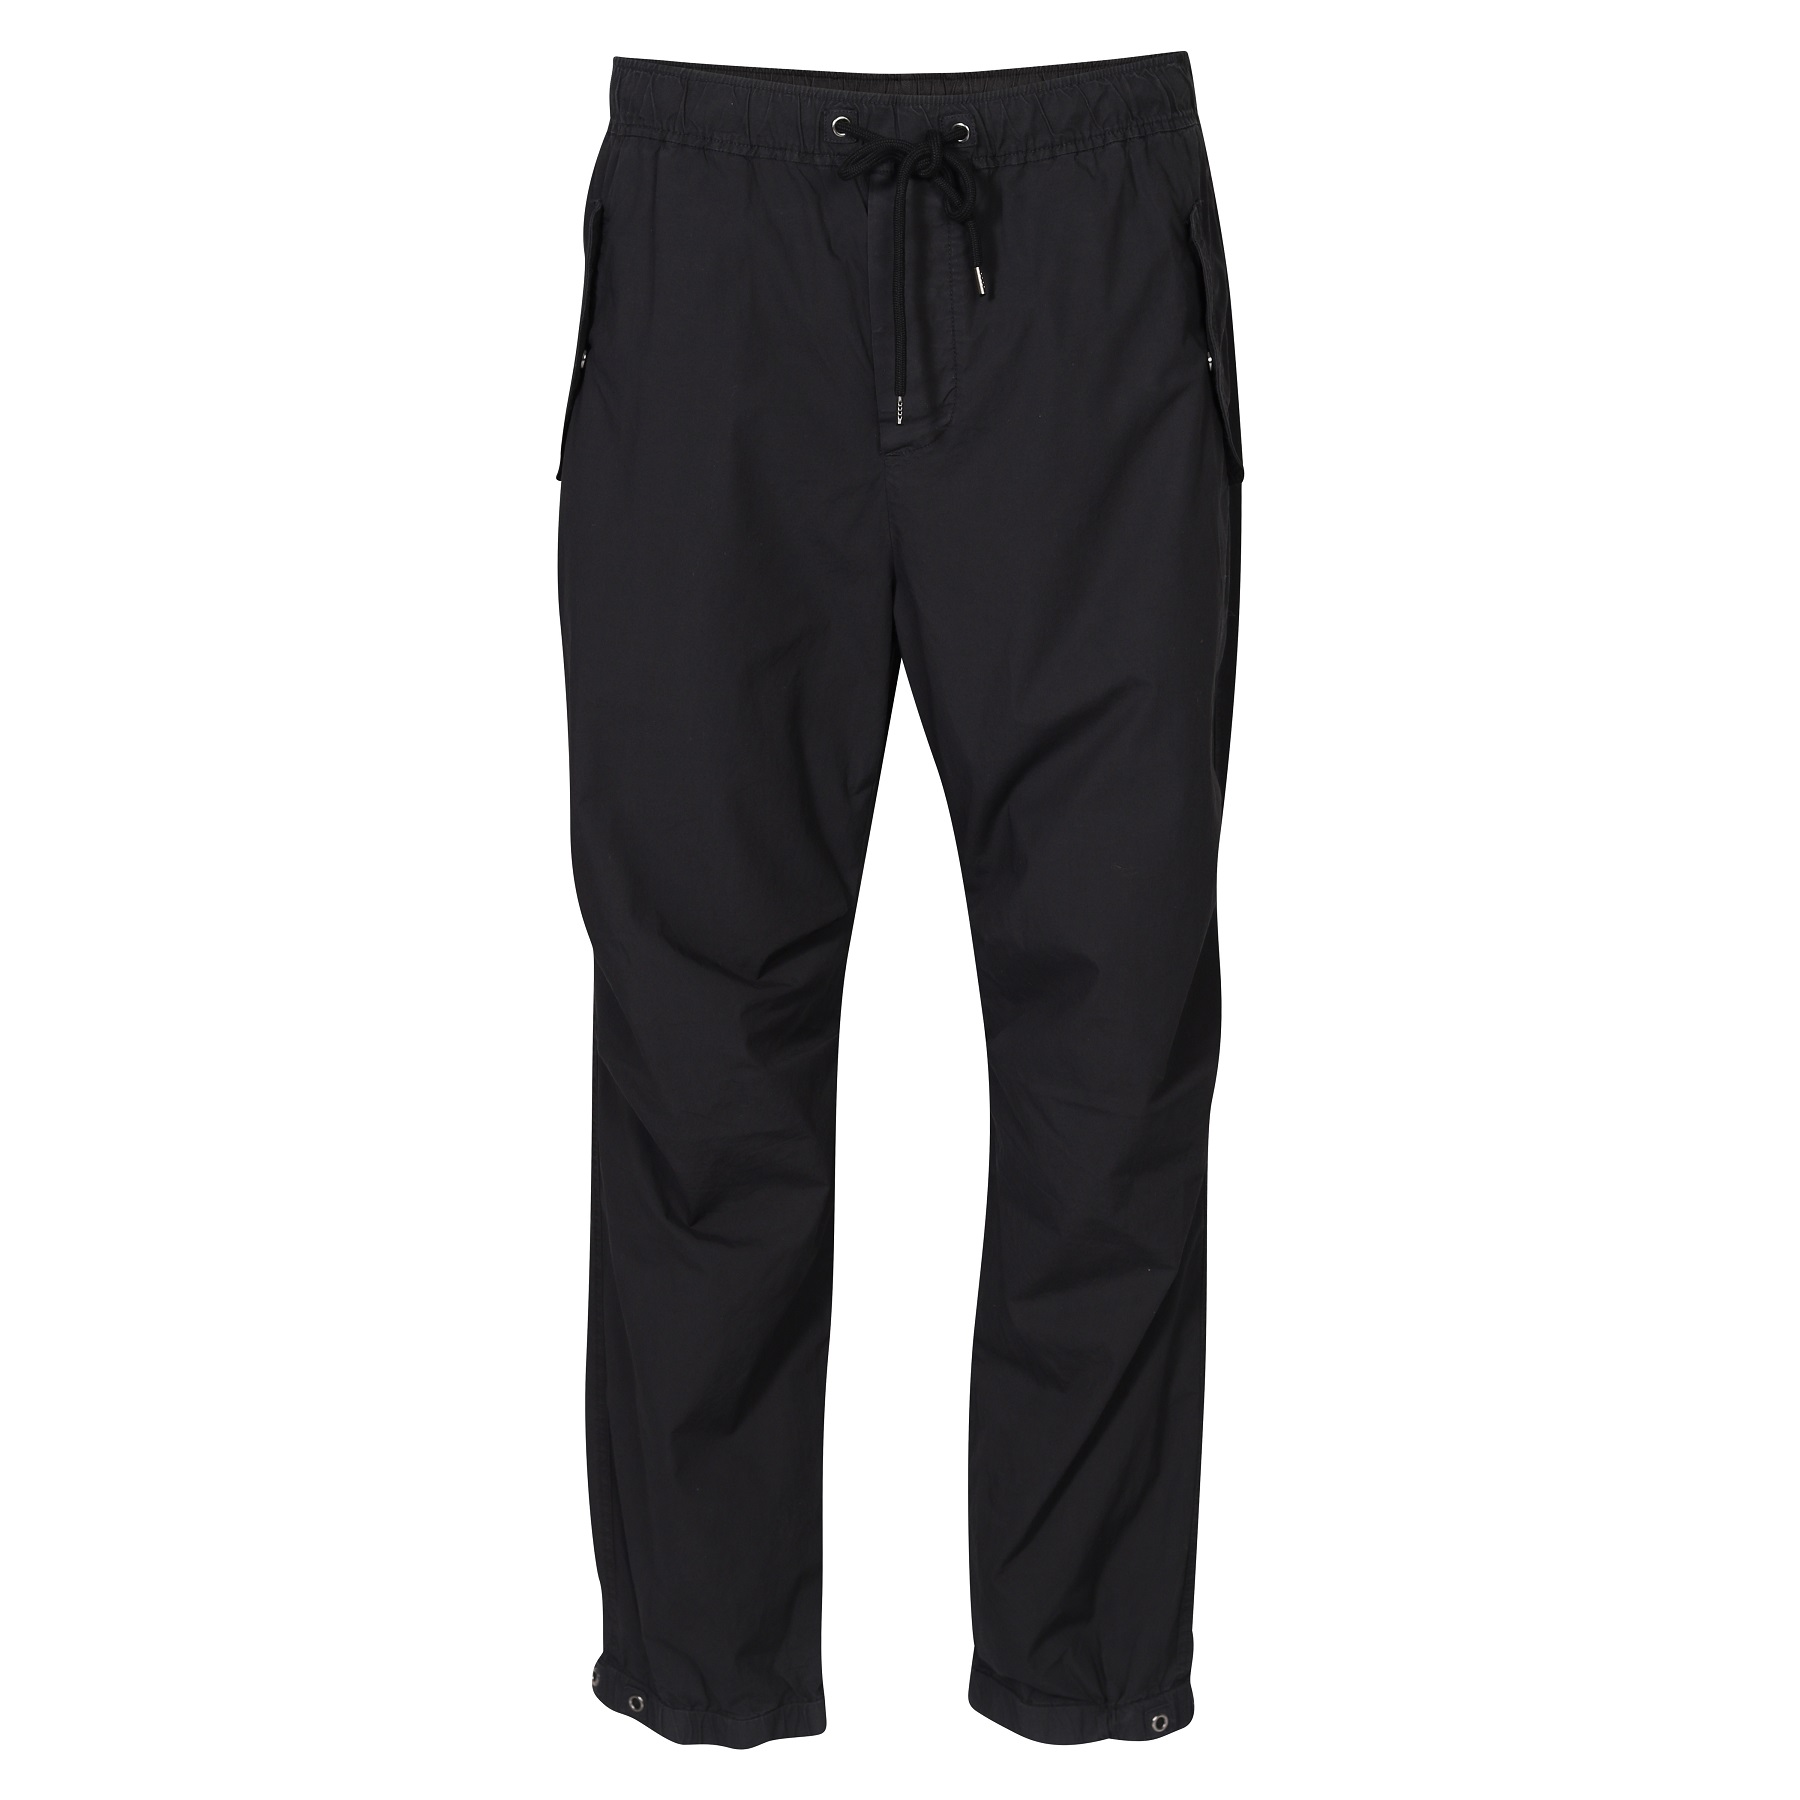 JAMES PERSE Stretch Supima Flight Pant in Black 1/S